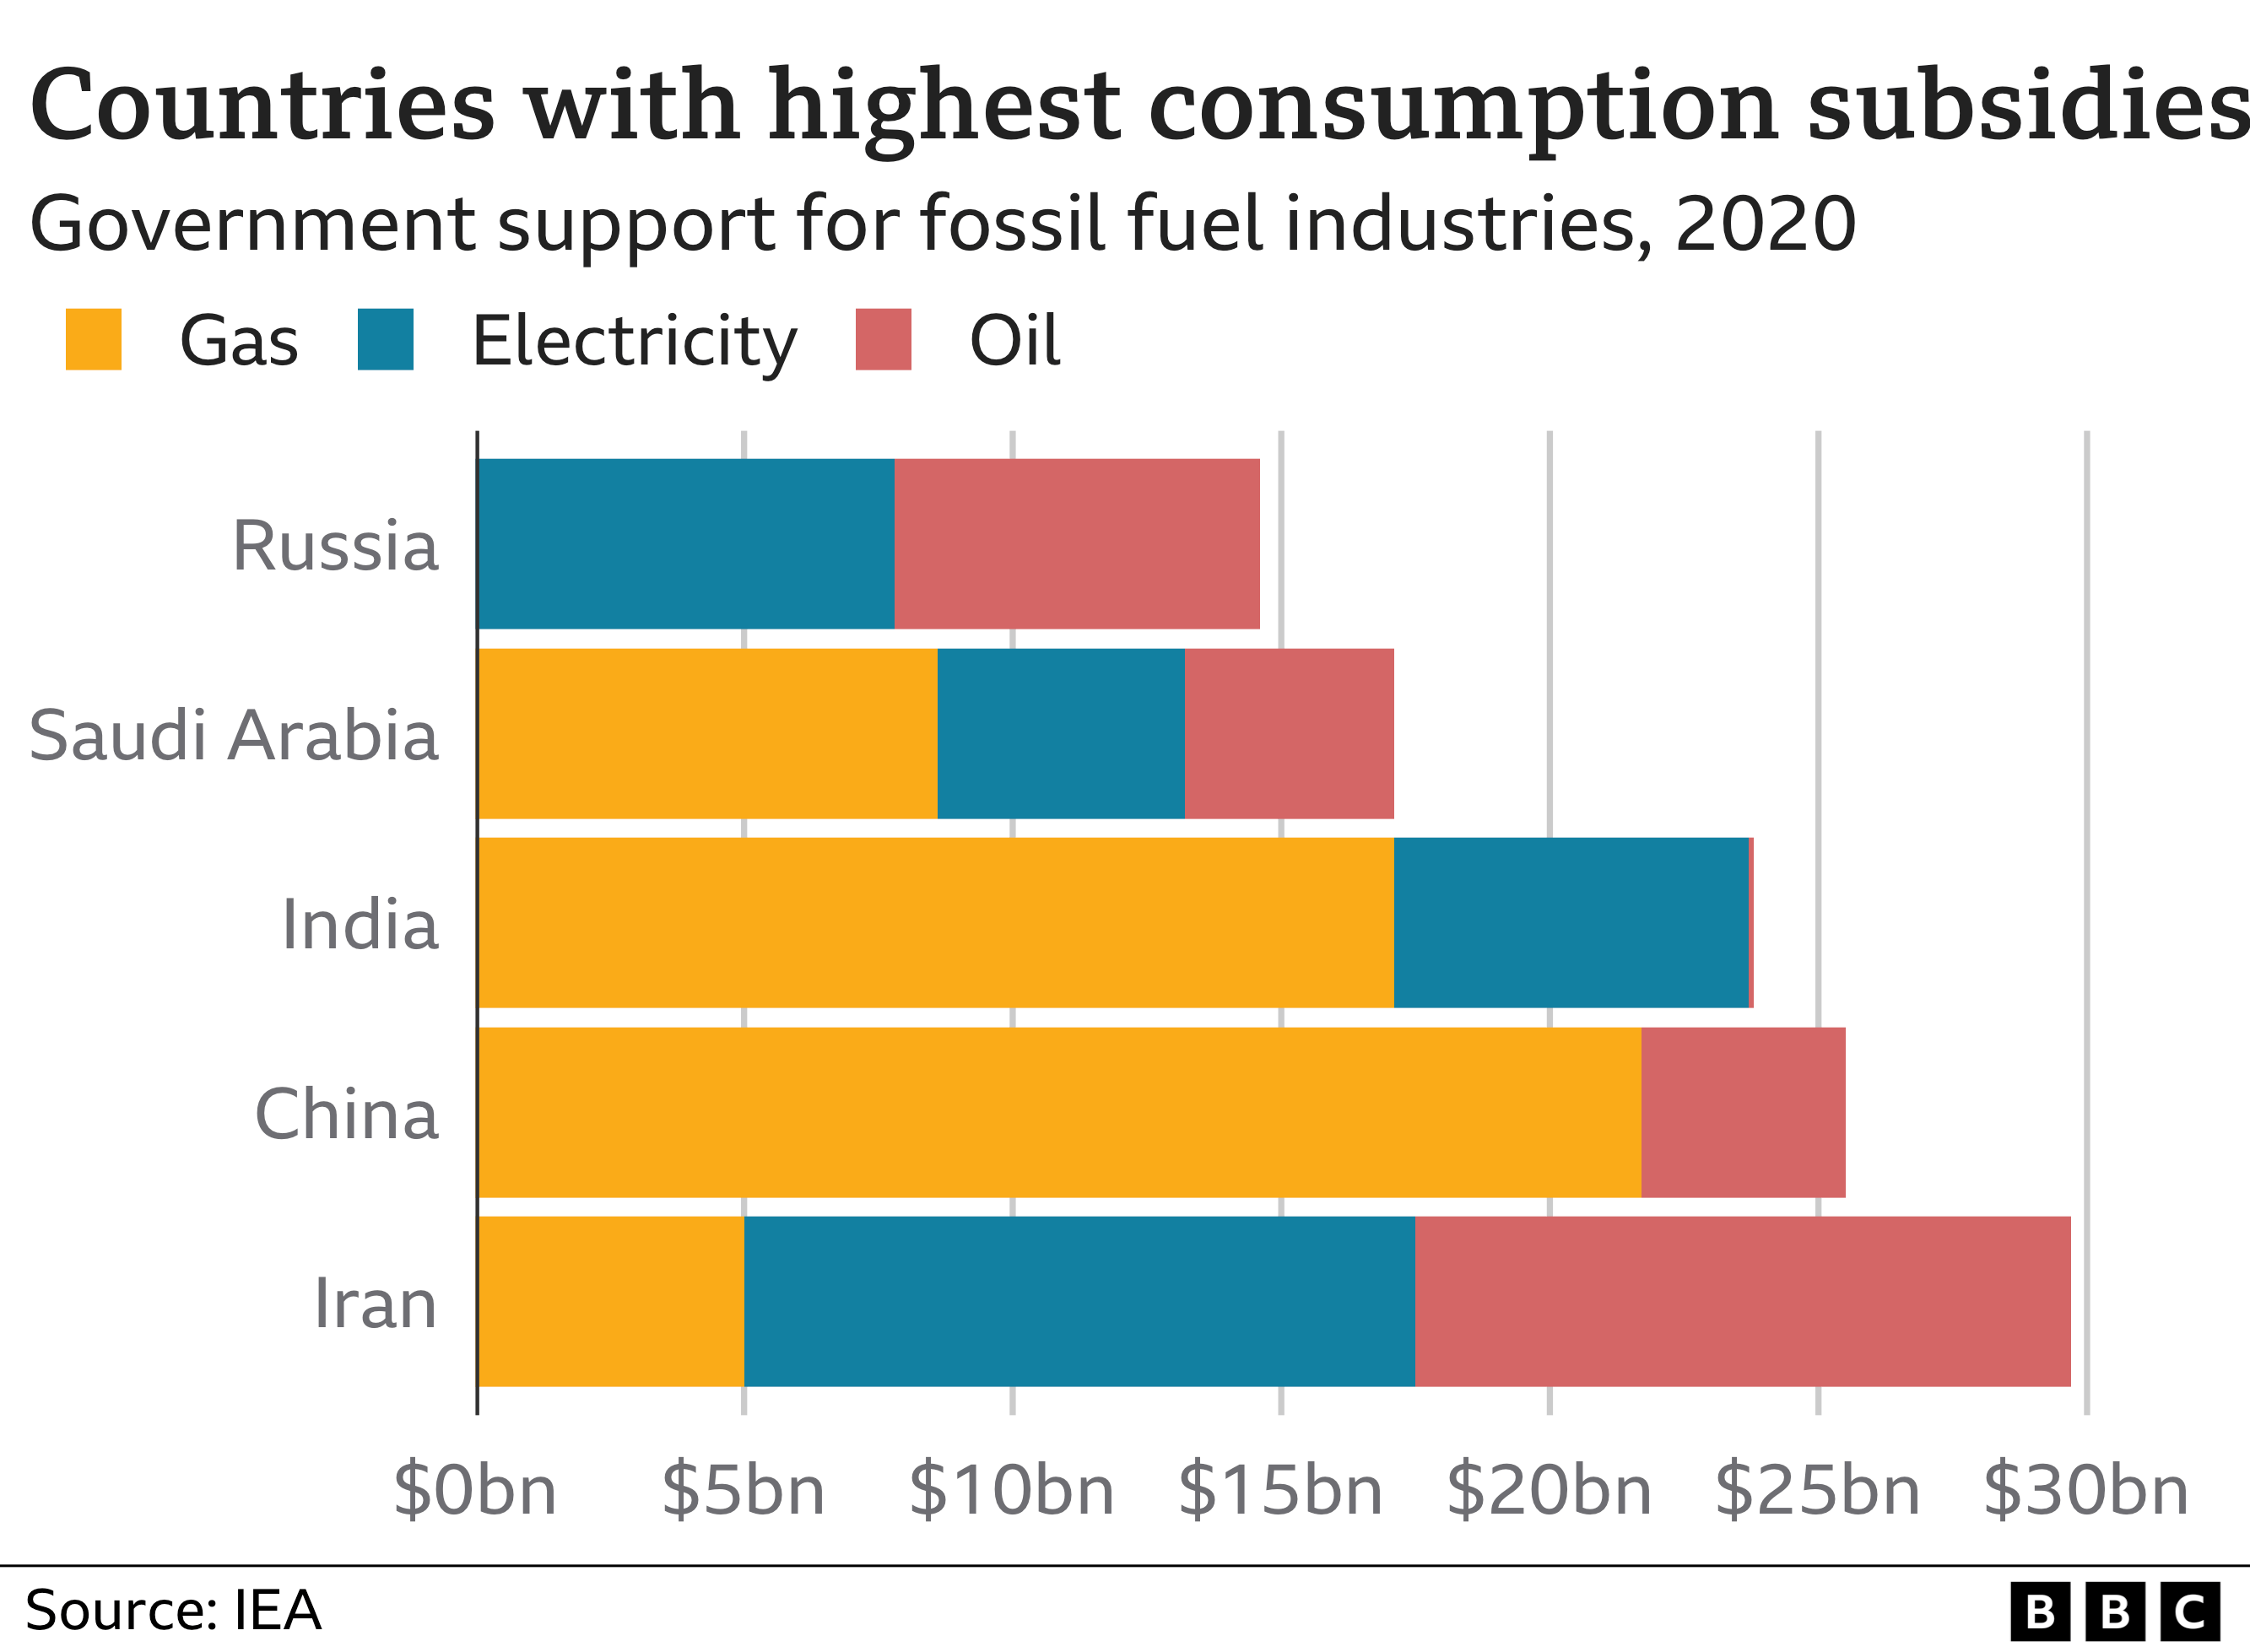 A graphic showing the countries with the highest government support for fossil fuels. The graphic shows Iran receiving government subsidies of almost $30 billion in government support for gas, electricity and oil. China is second highest with more than $25 billion, followed by India (over $20bn), Saudi Arabia (more than $16bn) and Russia (almost $15bn).